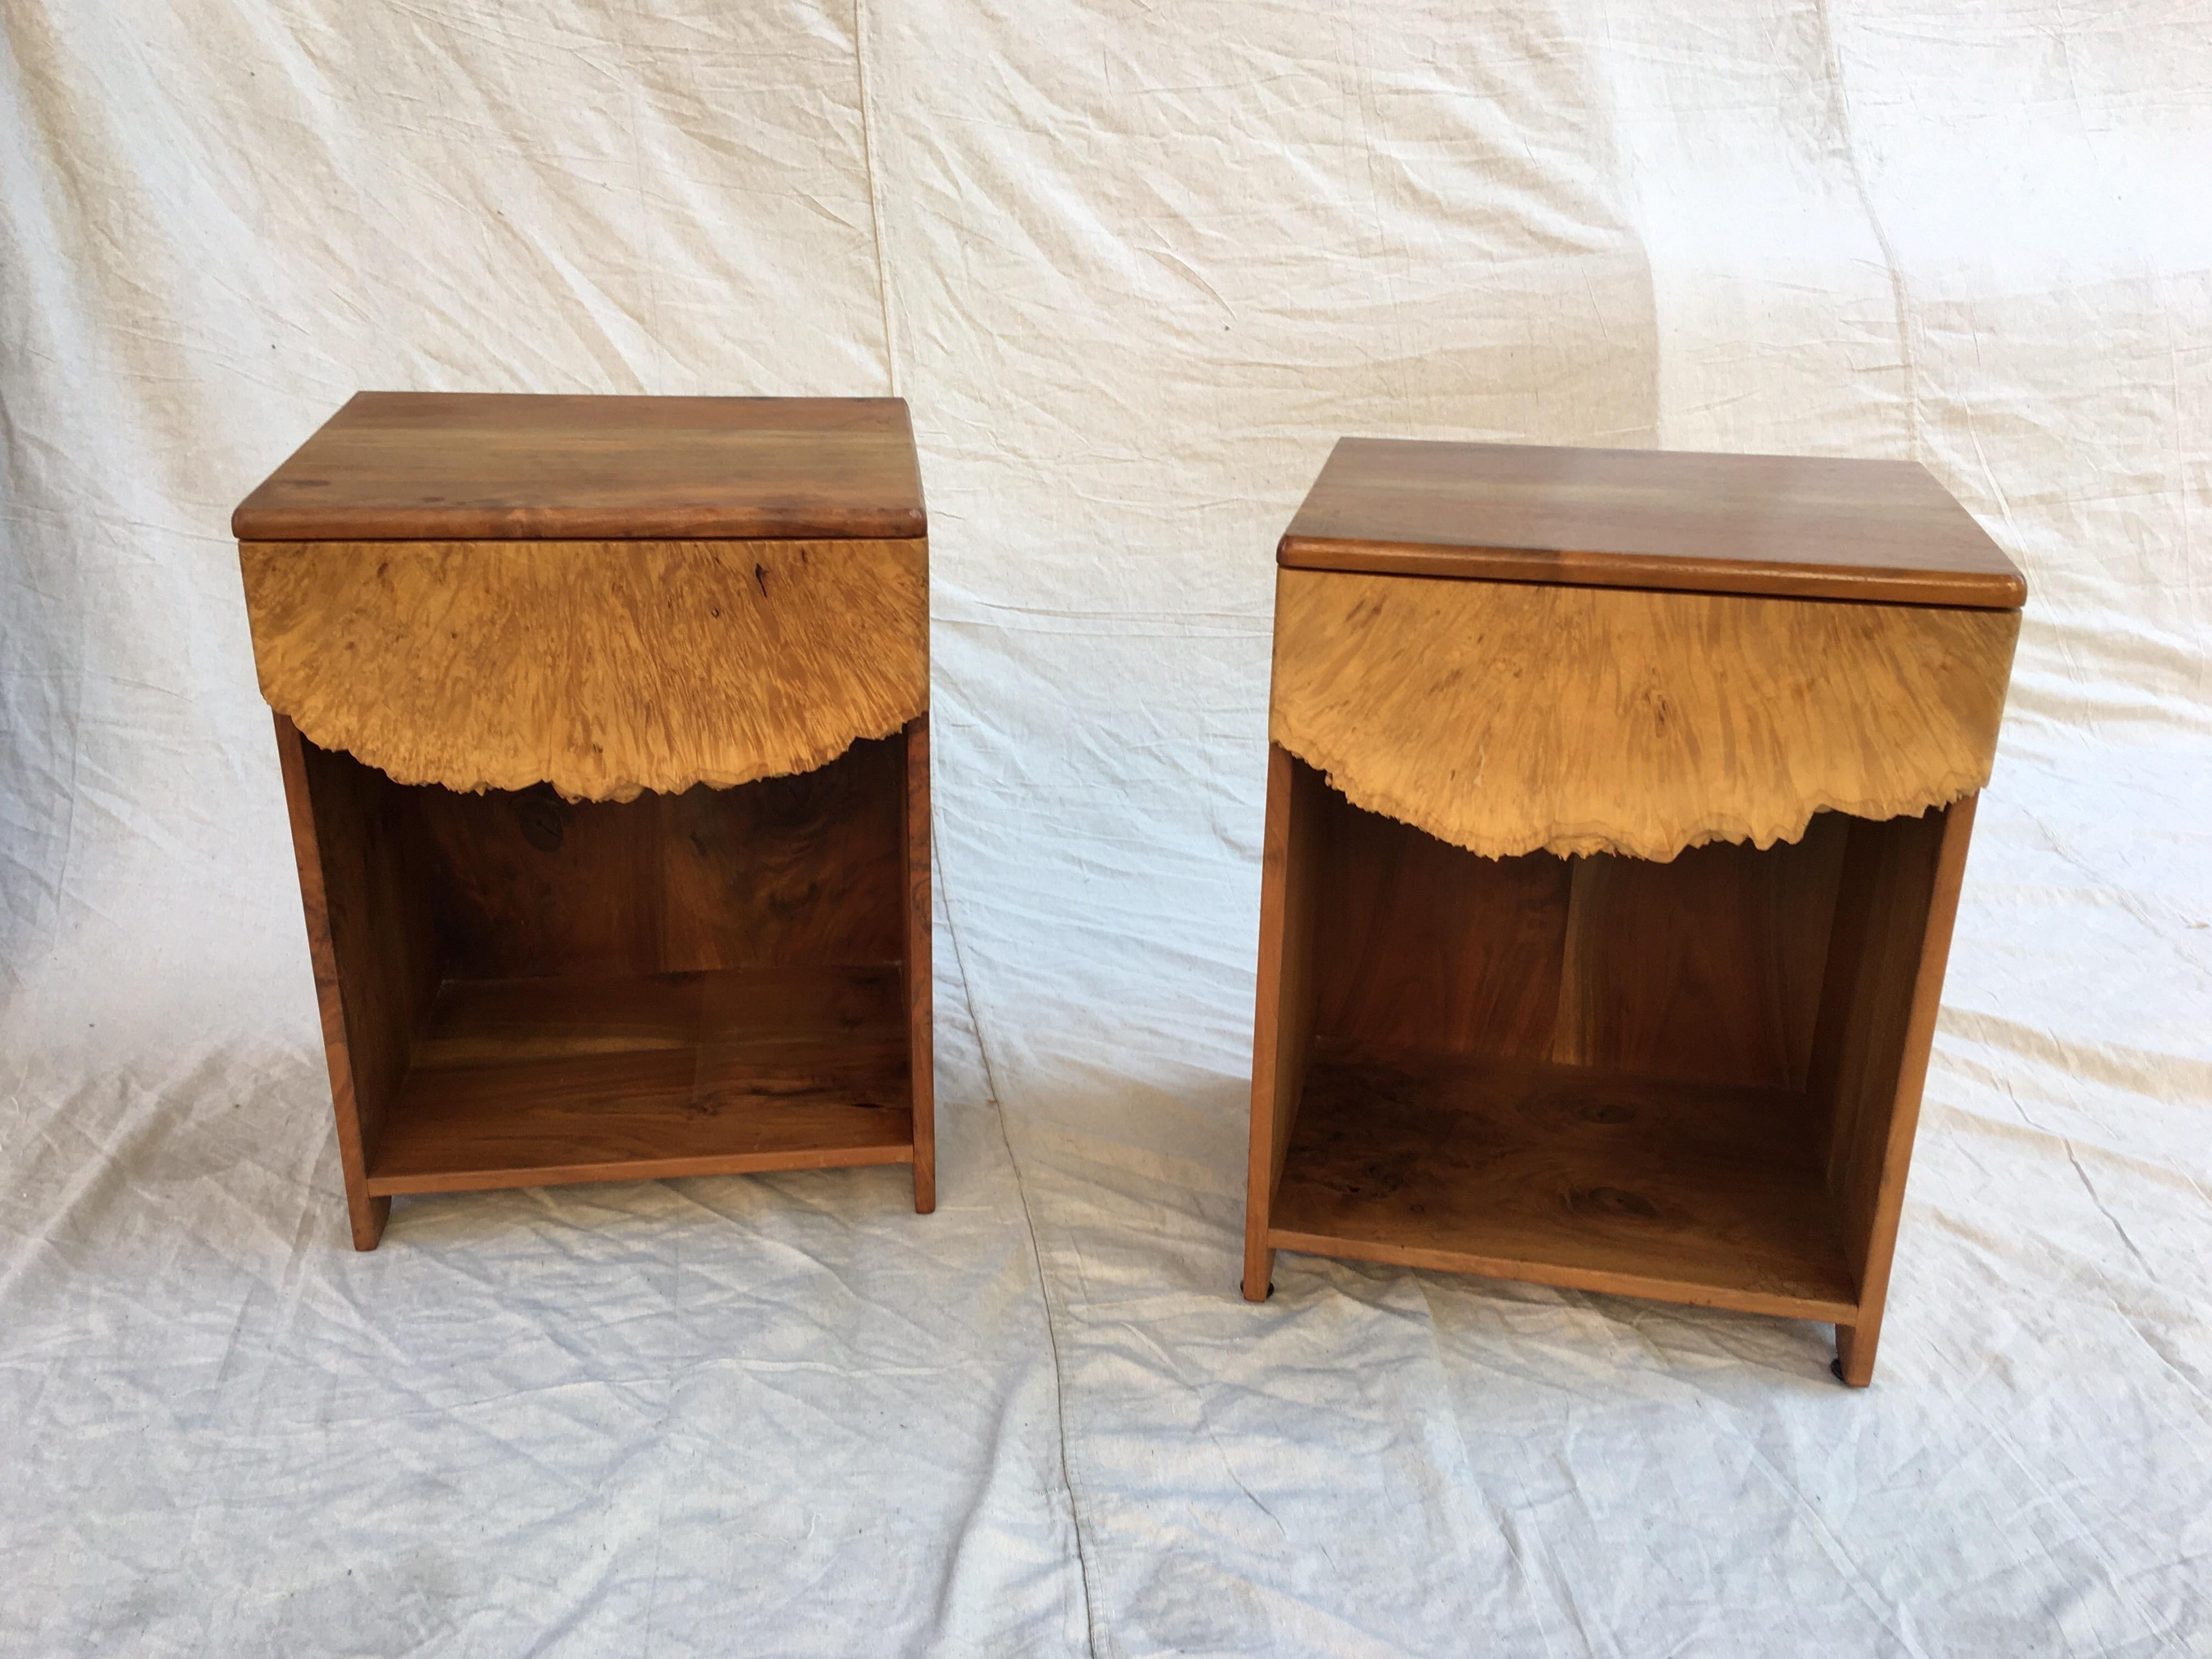 Michael Elkan pair of walnut and burled maple nightstands. Designed and executed in 1988 for Philadelphia customers. Met and commissioned the artist when they met him at the Baltimore craft fair. Unique design and beautifully made. One top has had